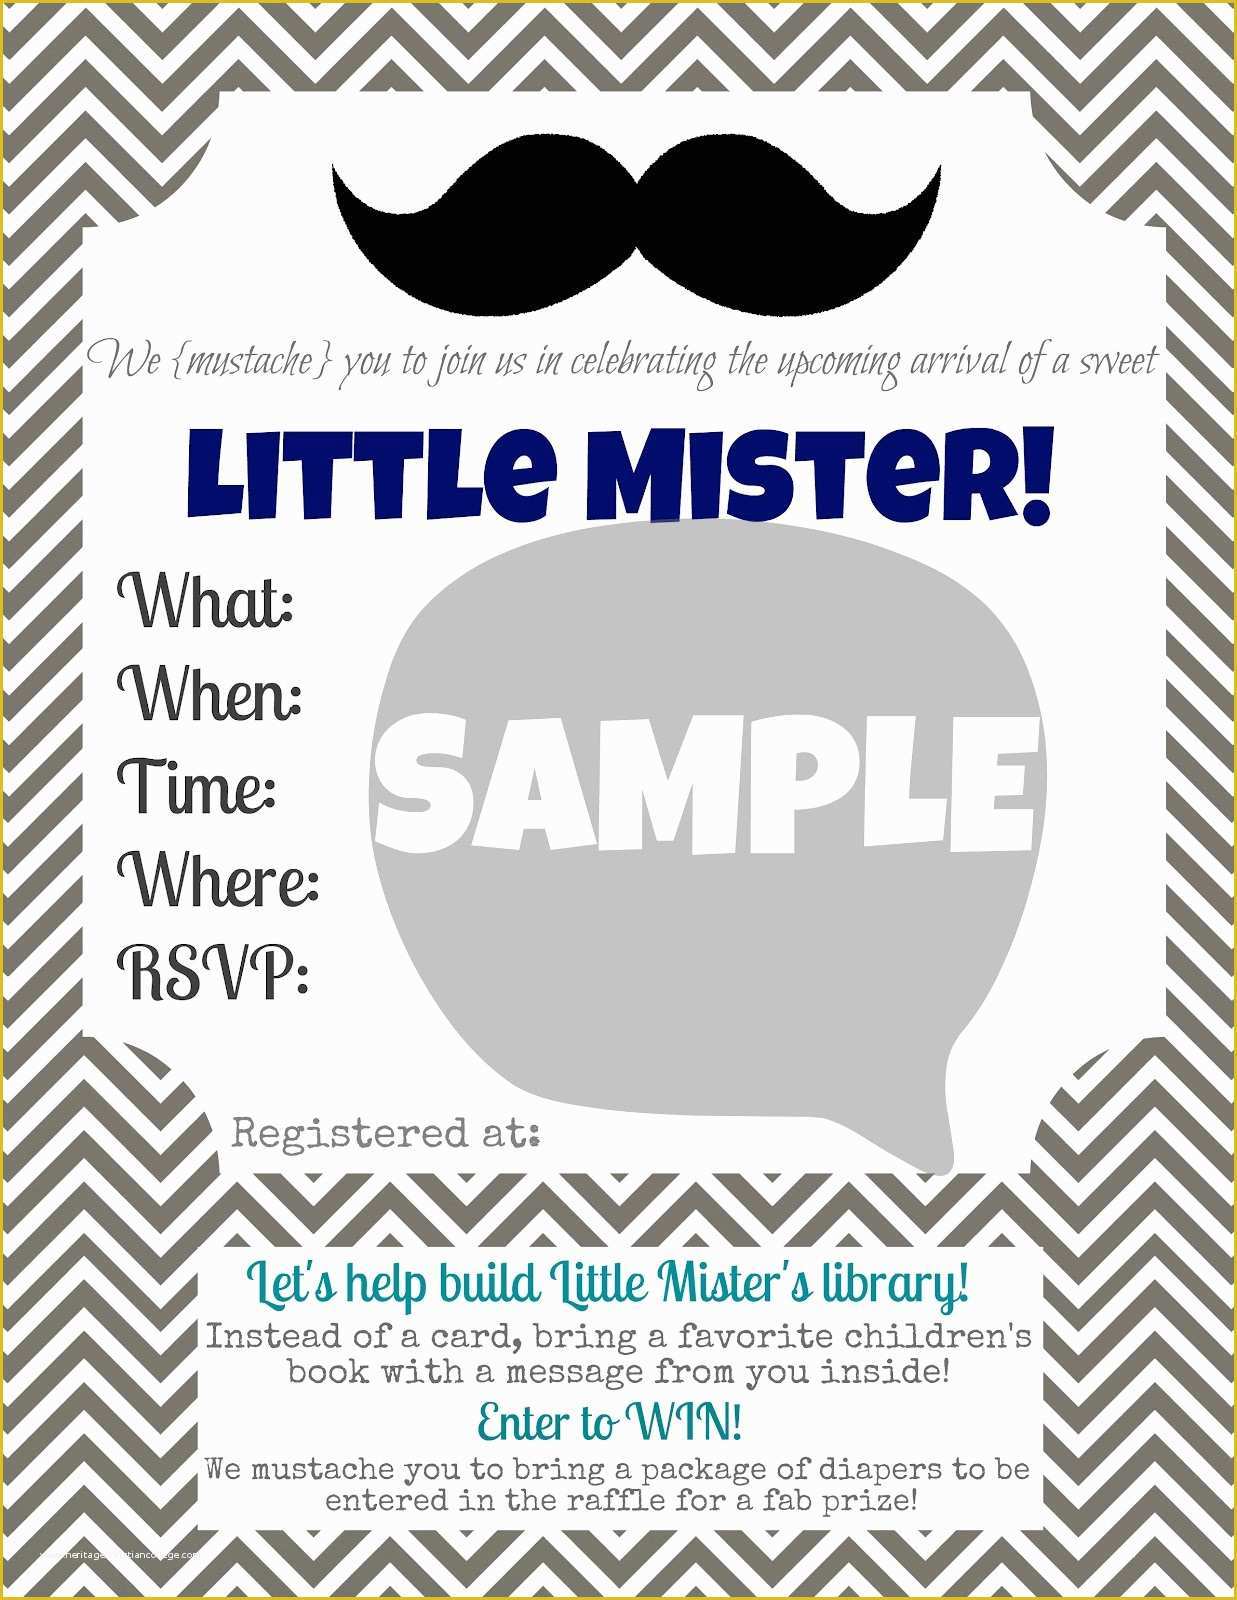 Mustache Baby Shower Invitations Free Templates Of Little Mister Mustache Bash Party Prints Mine for the